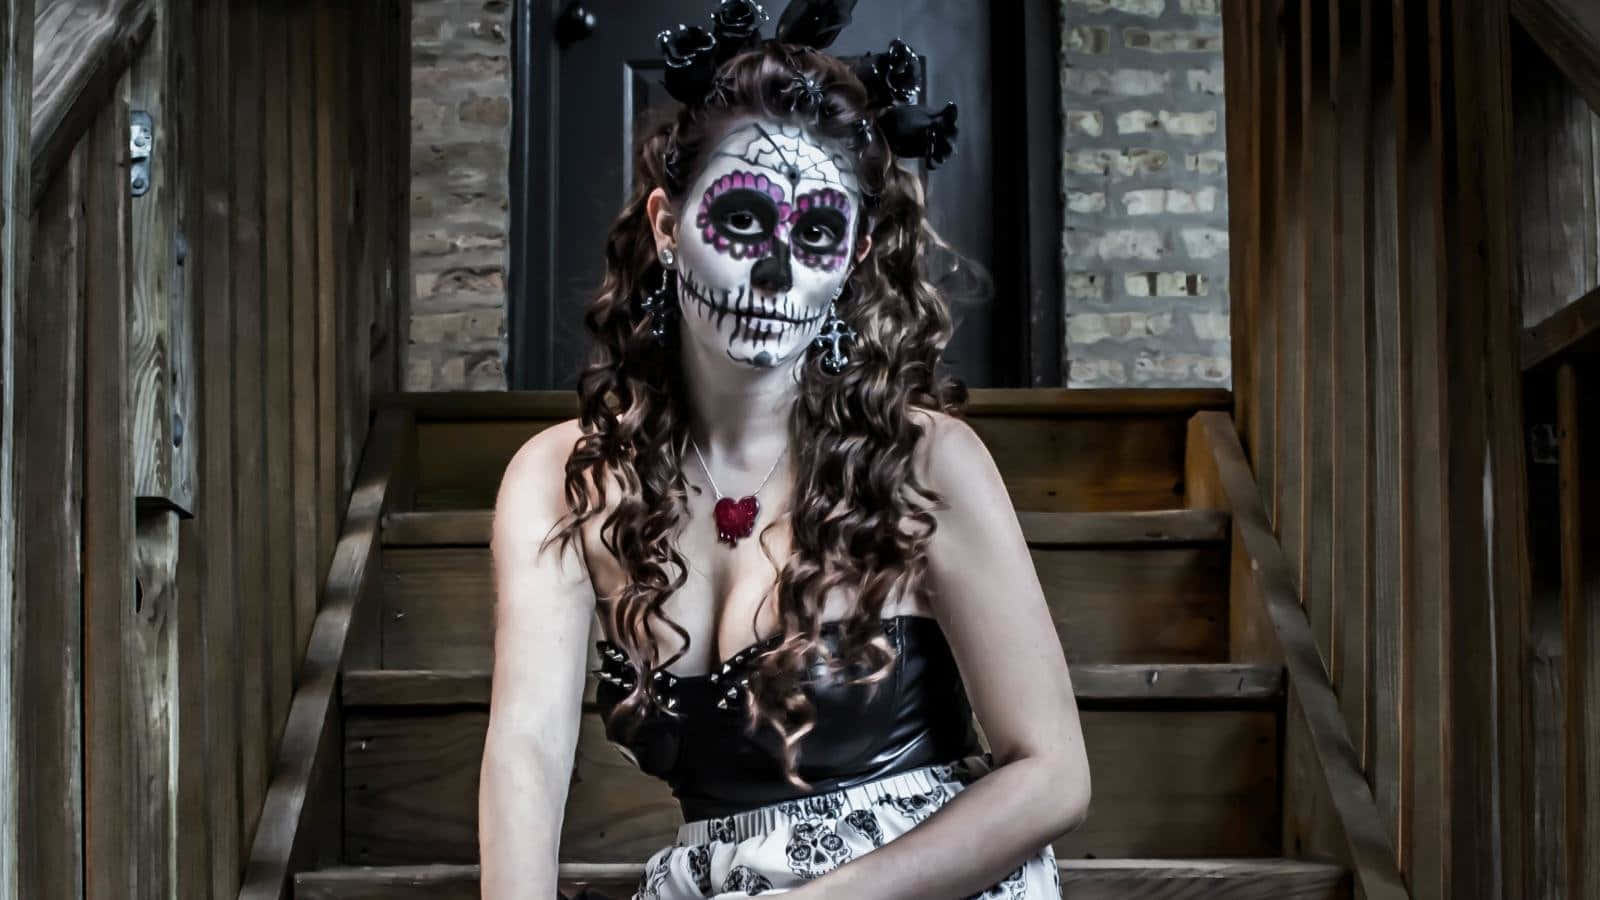 A Woman In A Sugar Skull Costume Sitting On Stairs